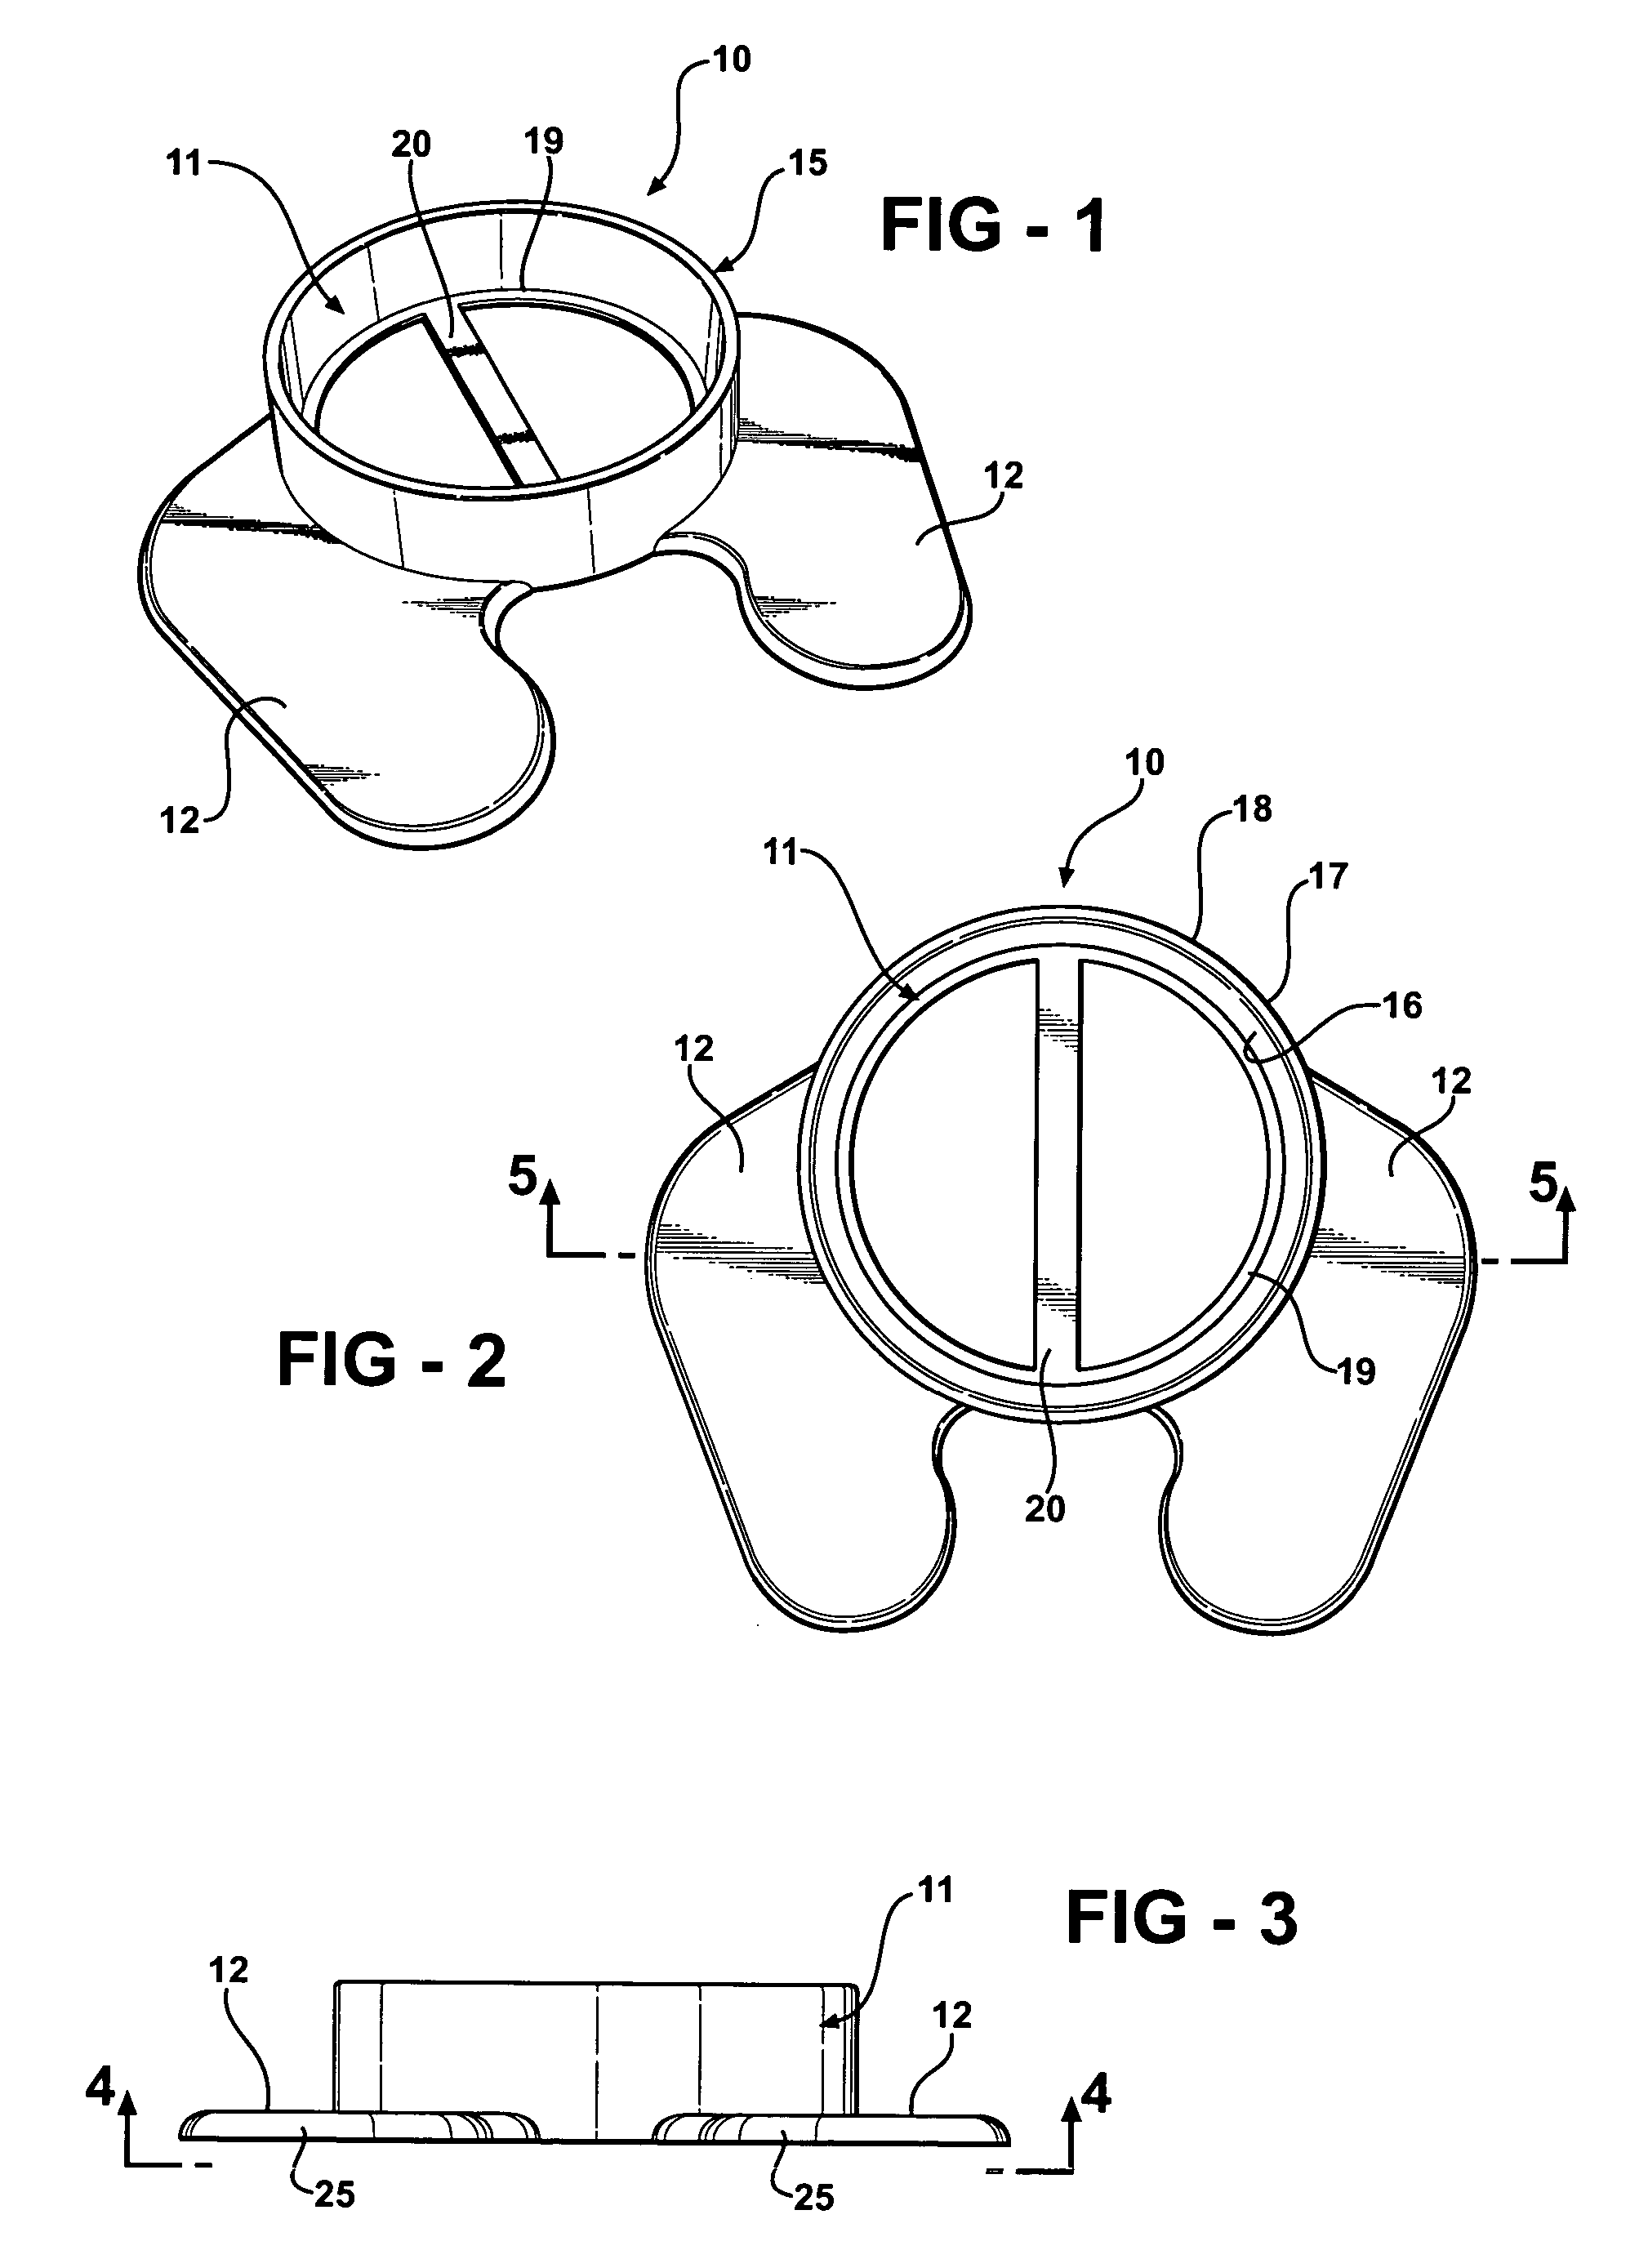 Retainer for immoblizing a bucket during mixing